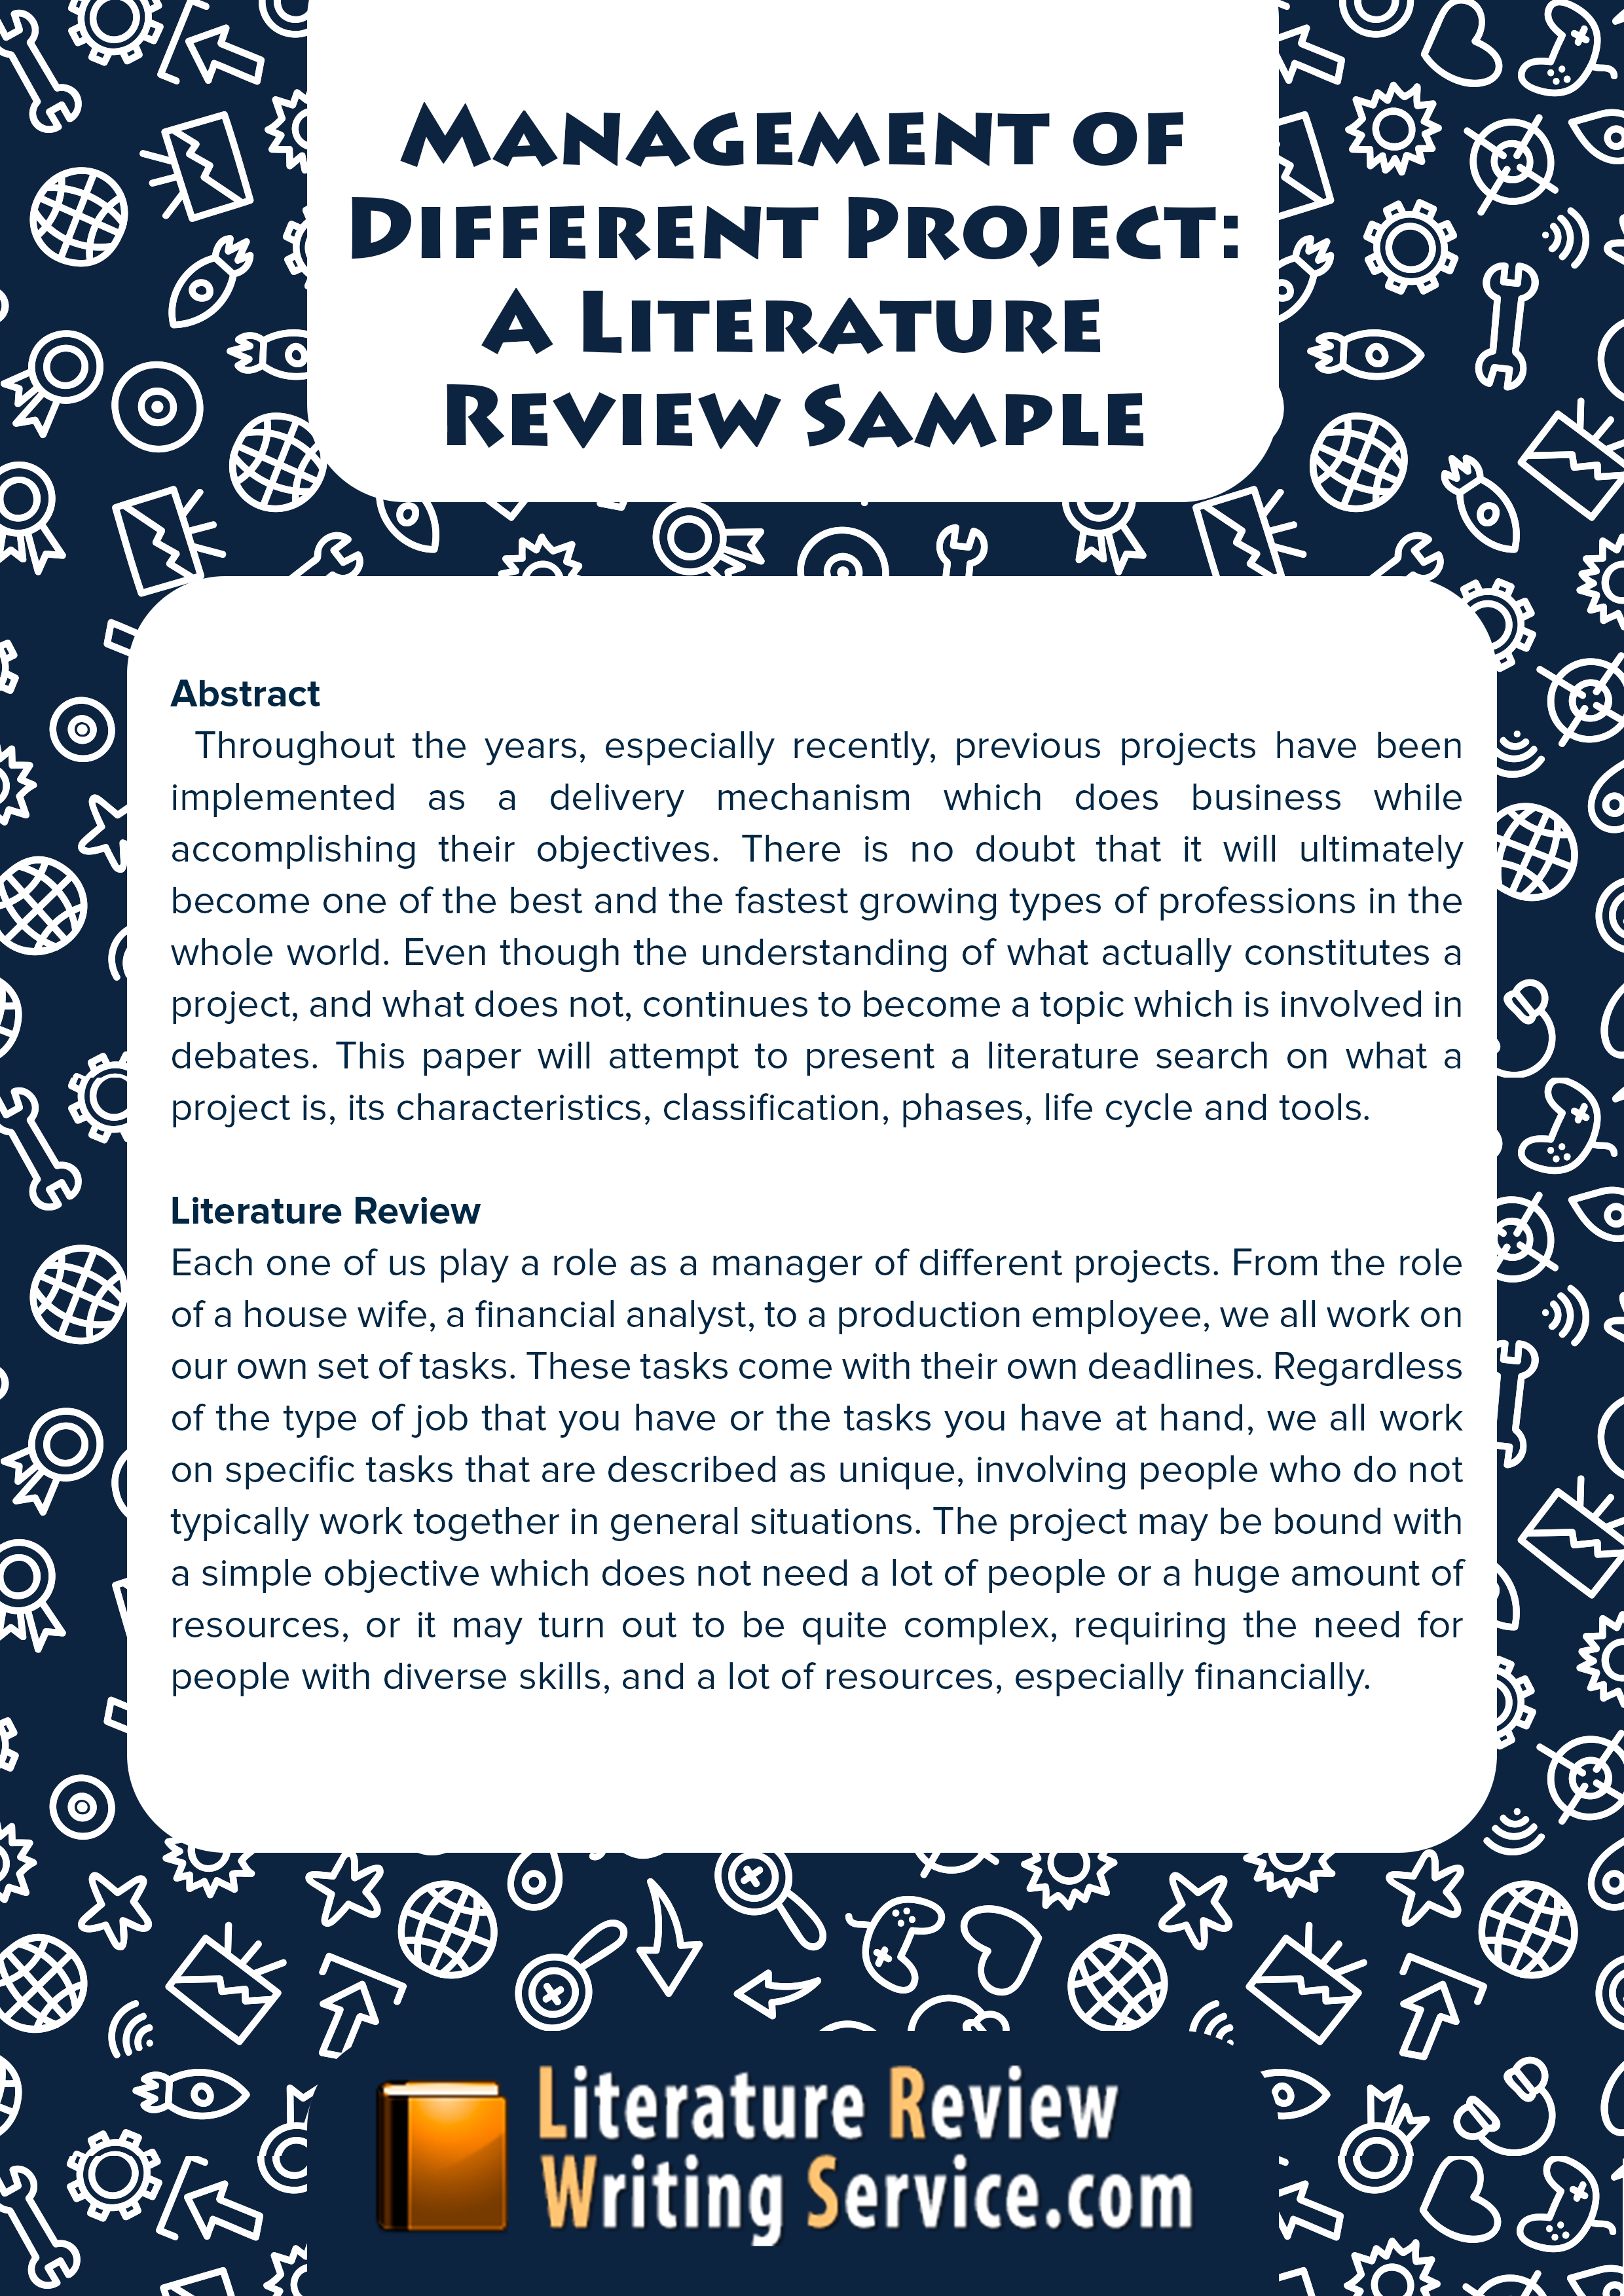 example of literature review poster